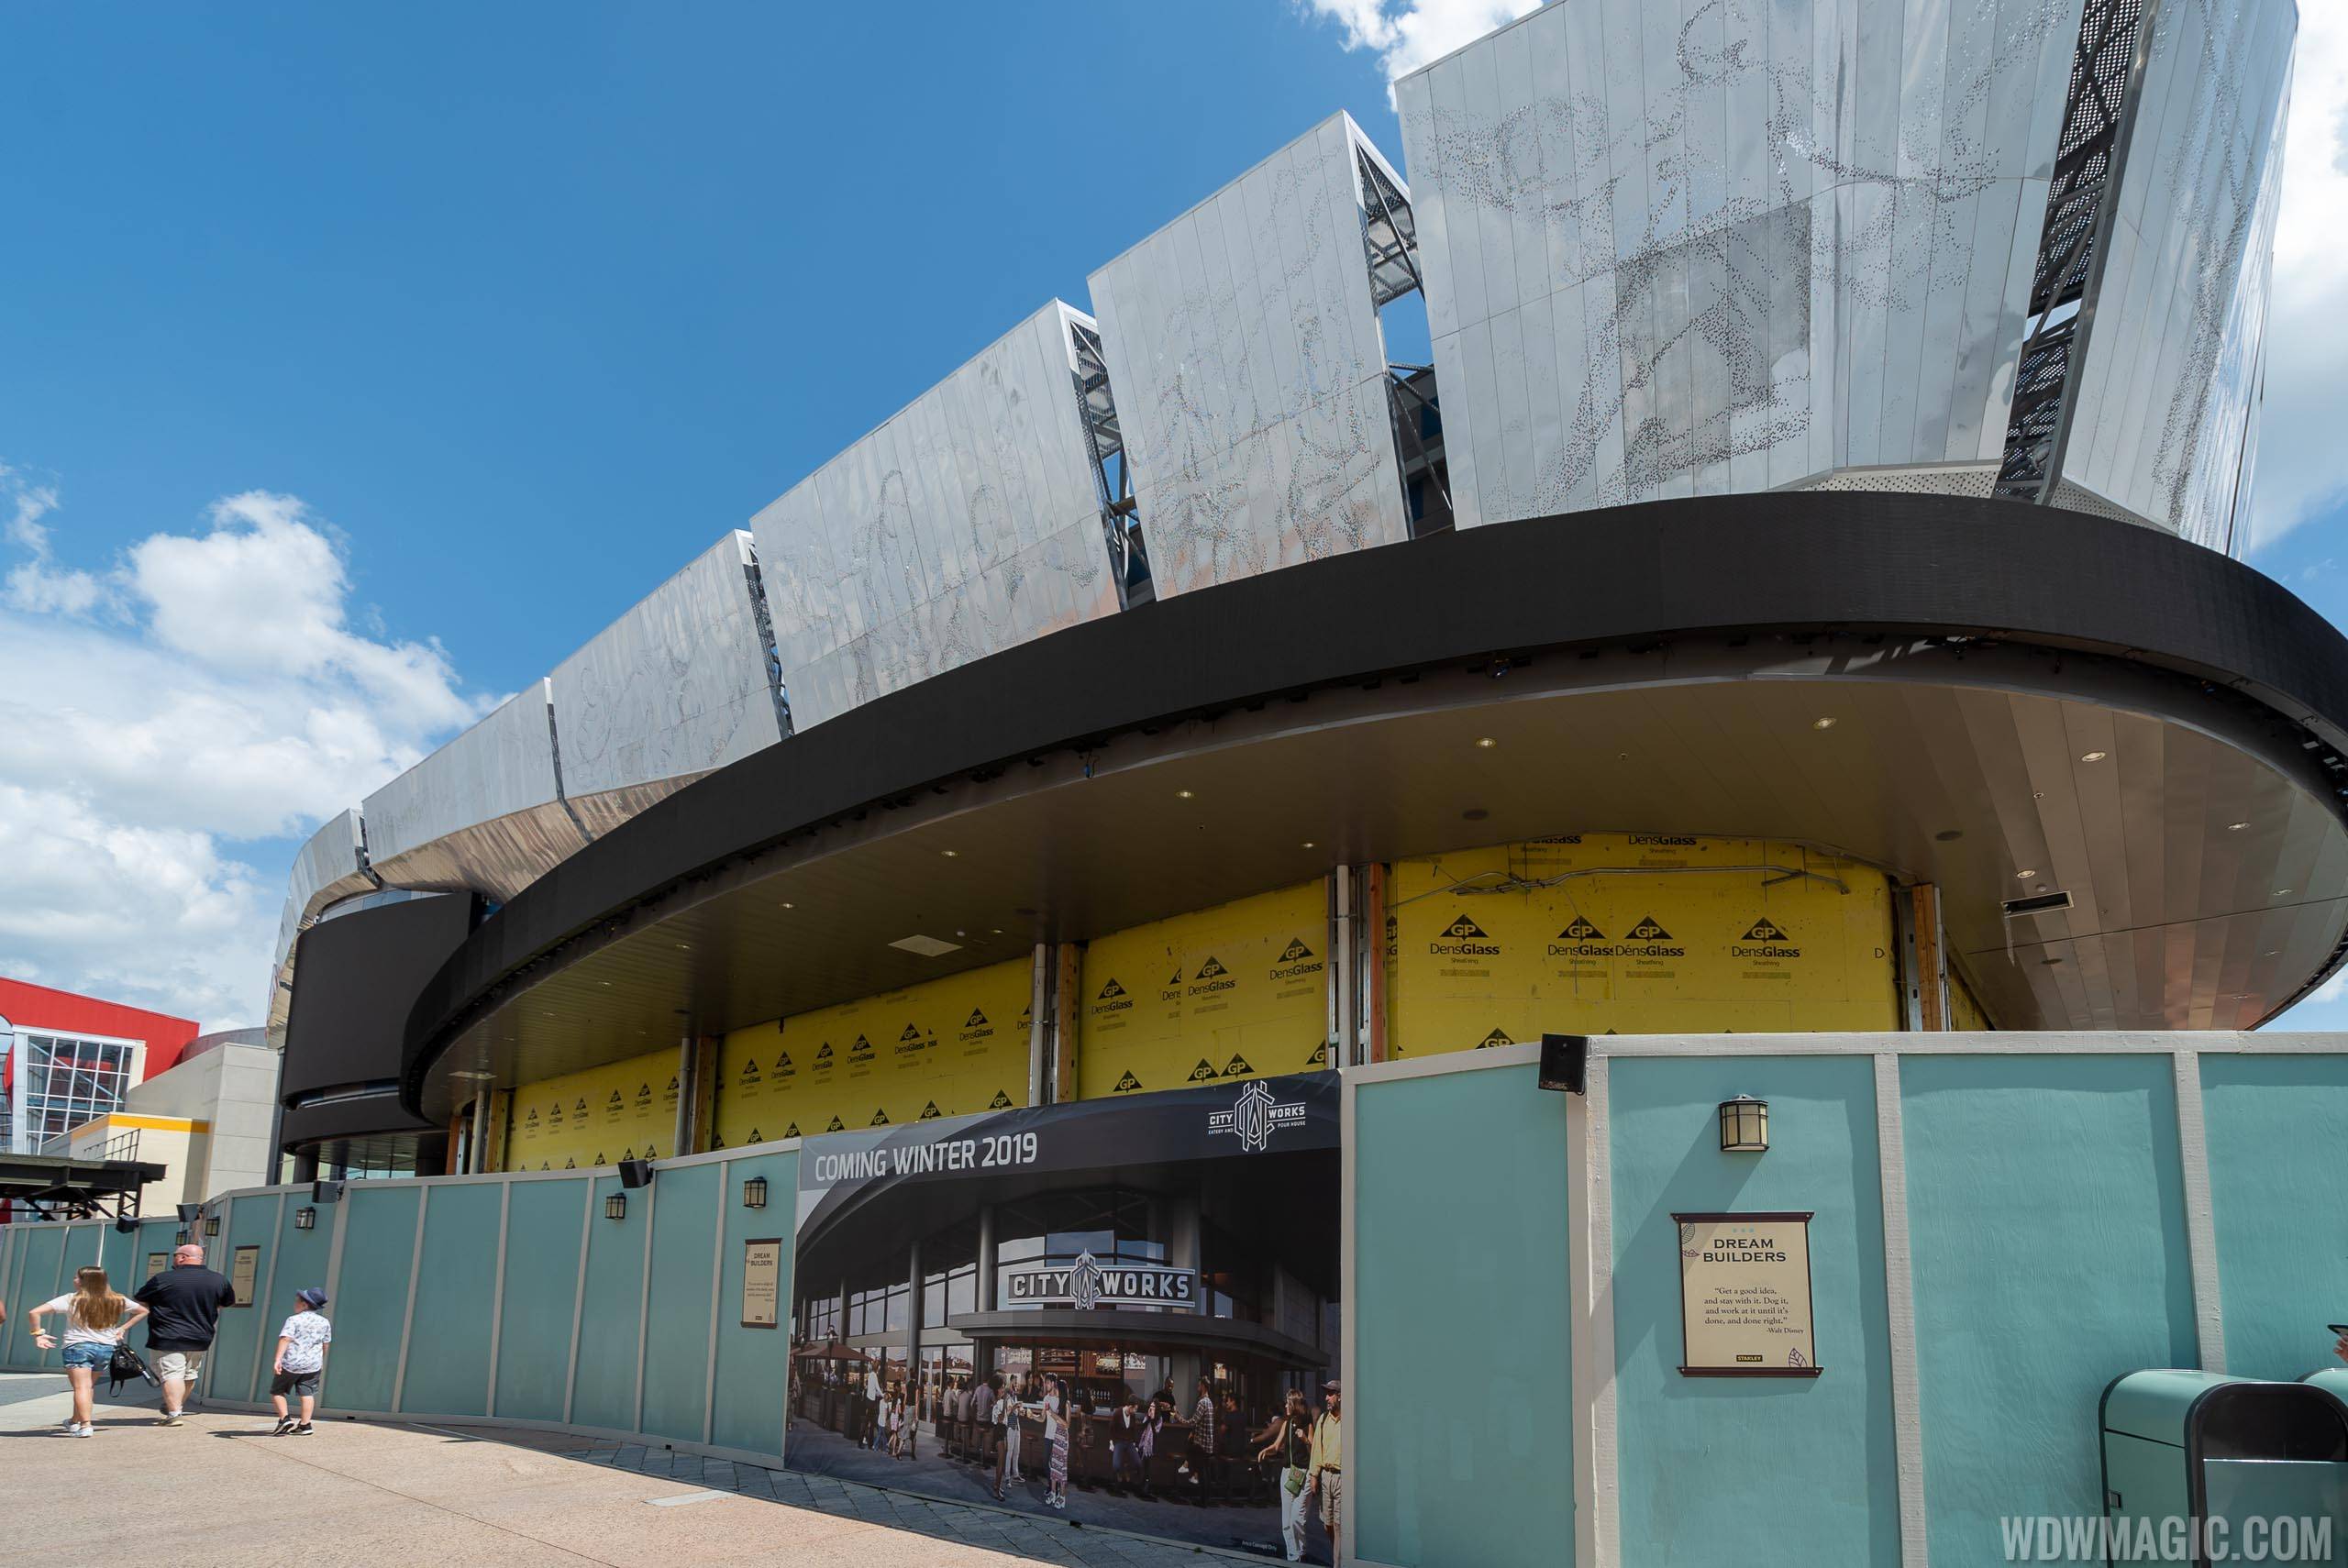 City Works Eatery and Pour House construction - June 2019